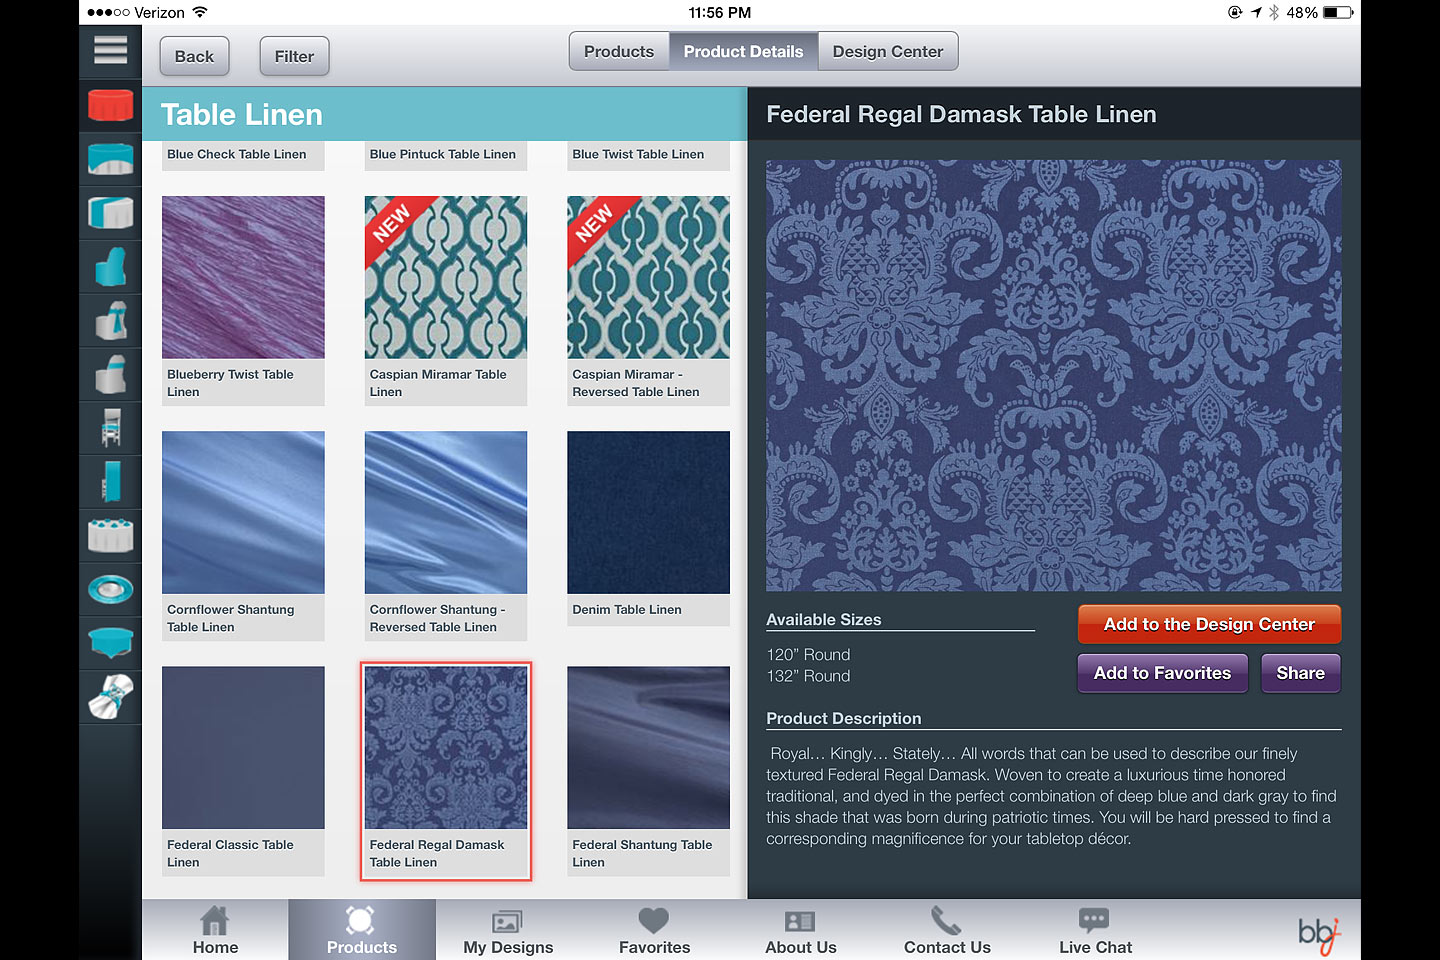 a screen capture of a table linen product details module featured in the bbj linen ios ipad app designed and developed by 4d, inc.